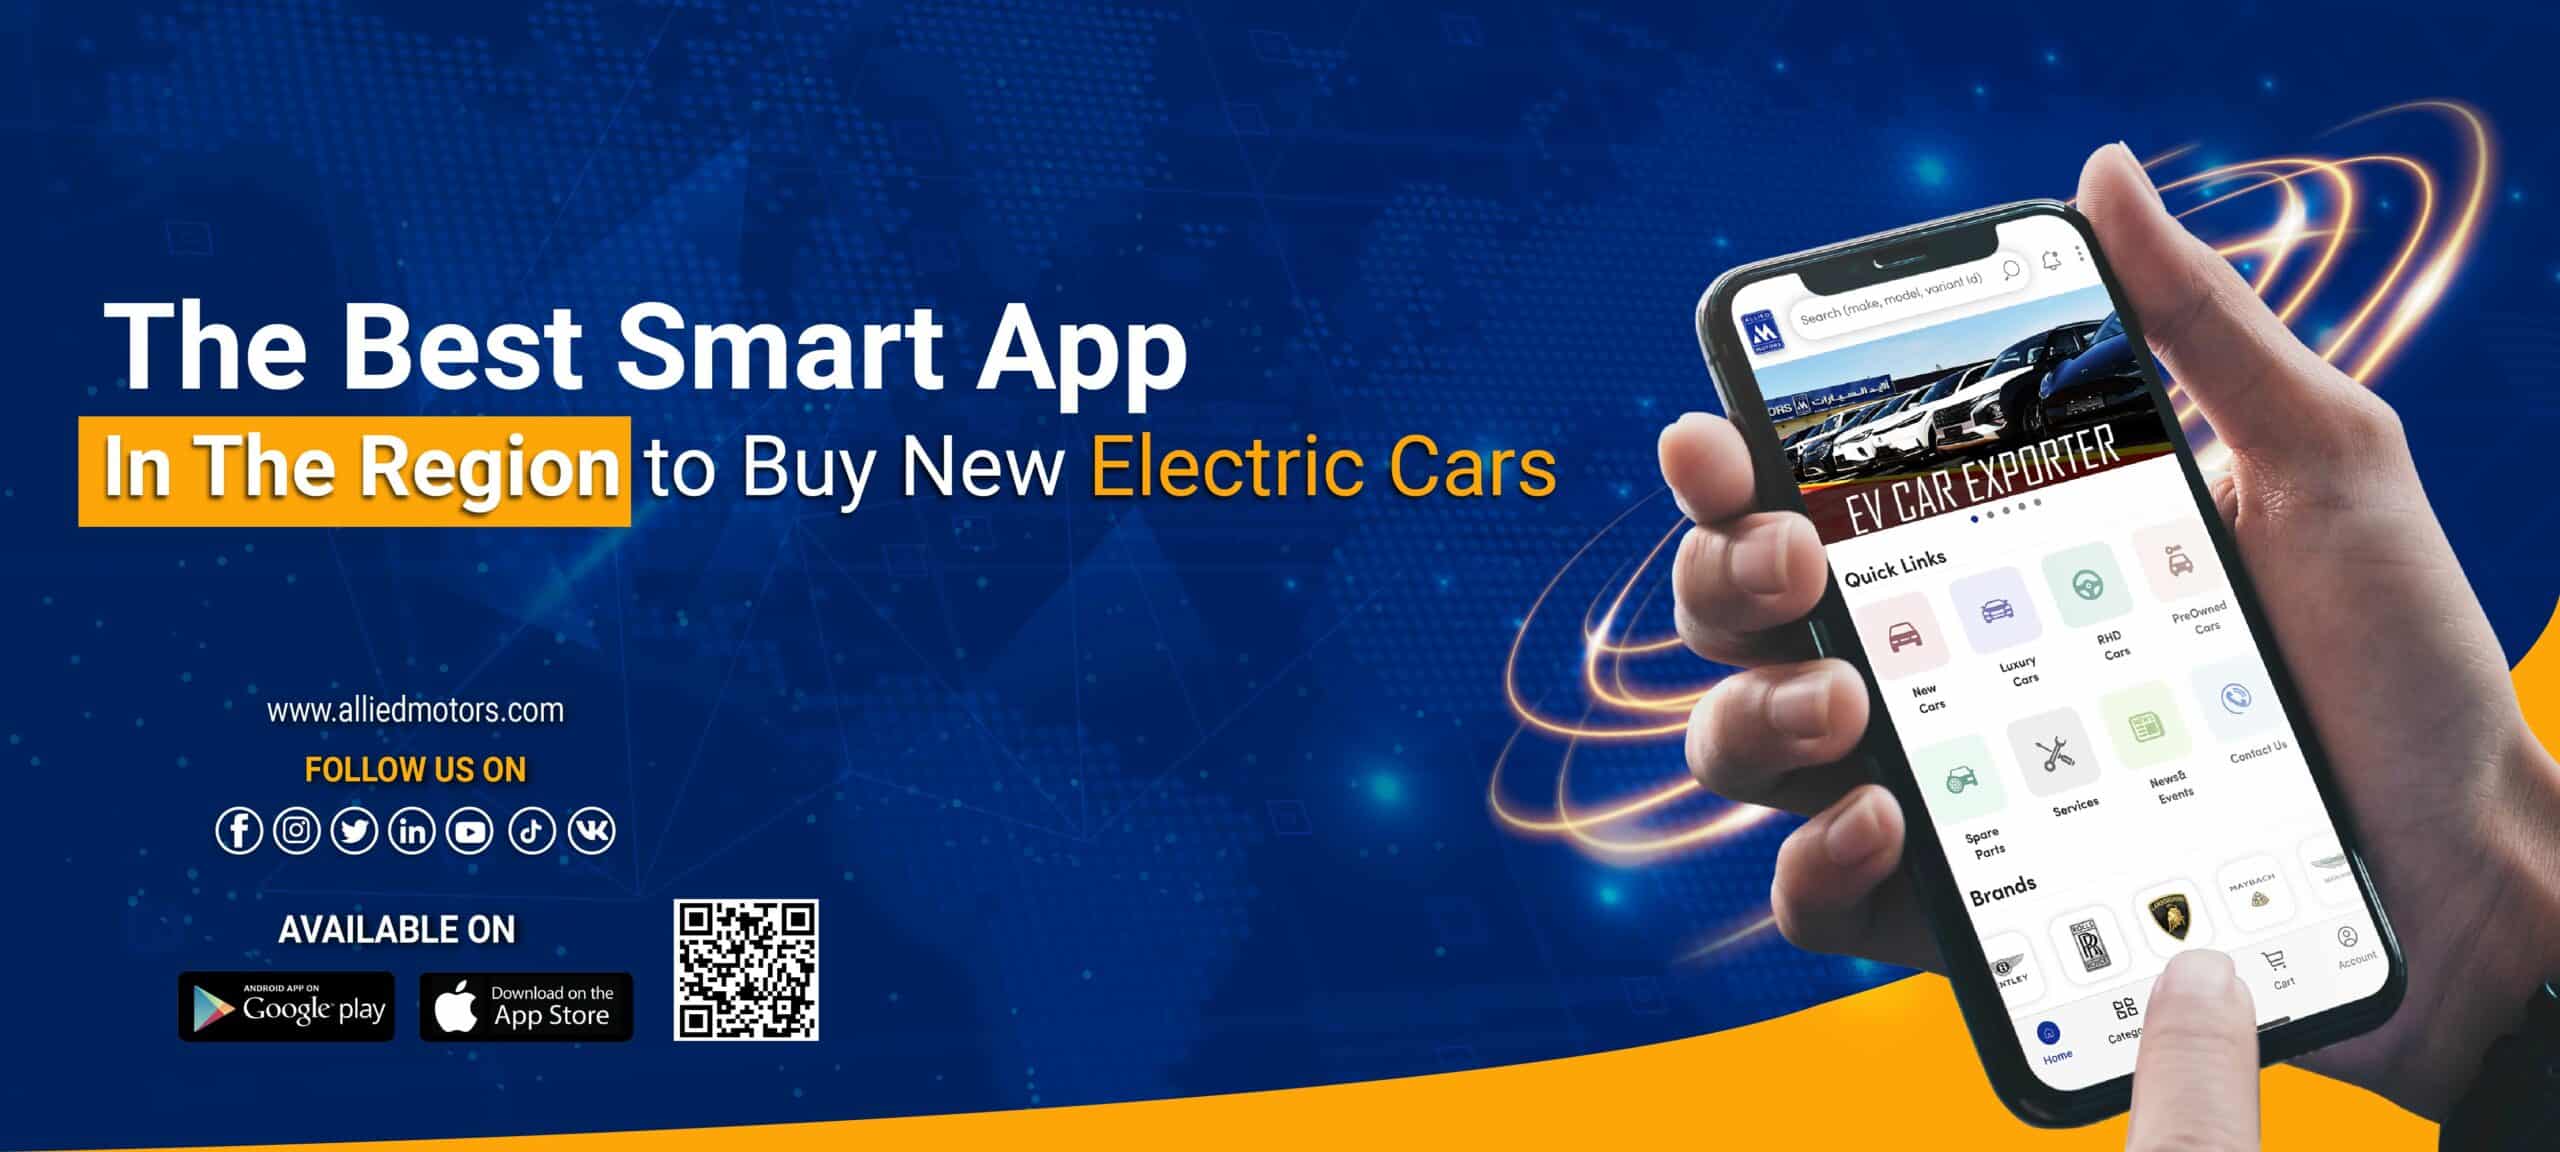 The Best Smart App in the Region to Buy New Electric Cars